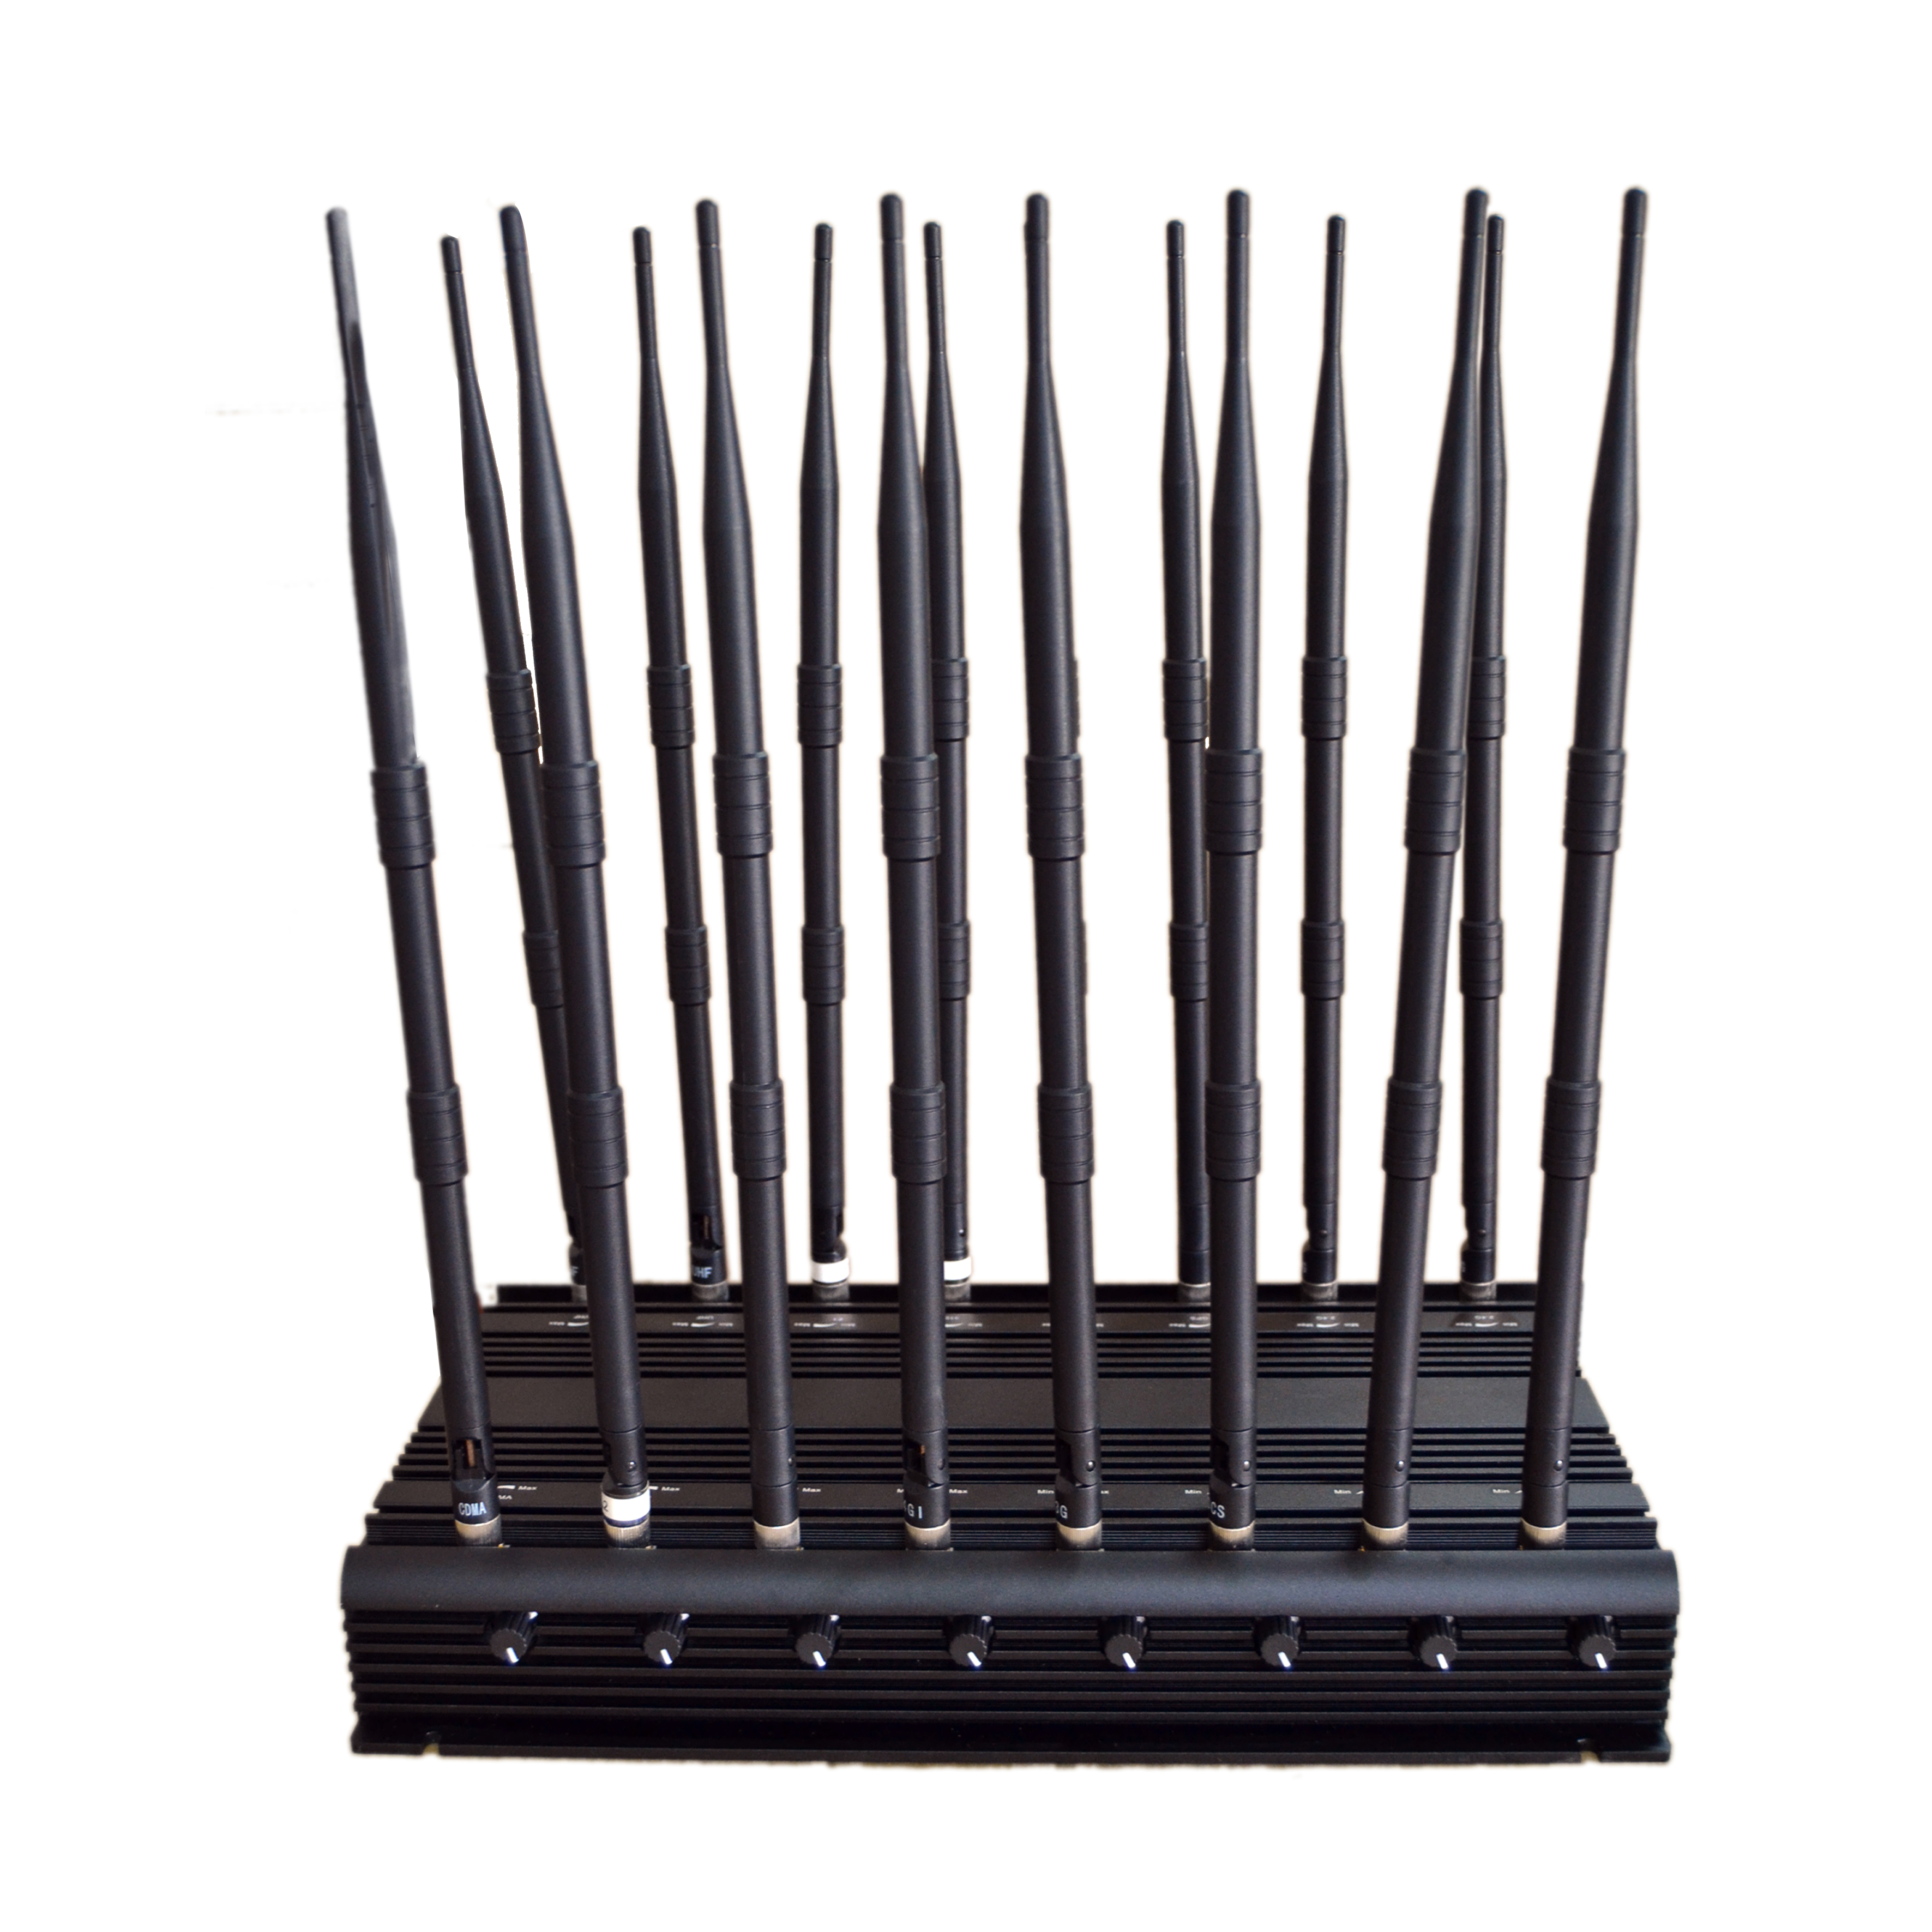 jammer legal zoom zoom | 38w High Power Desktop Multi-Band WiFi GPS Mobile Signal Jammer